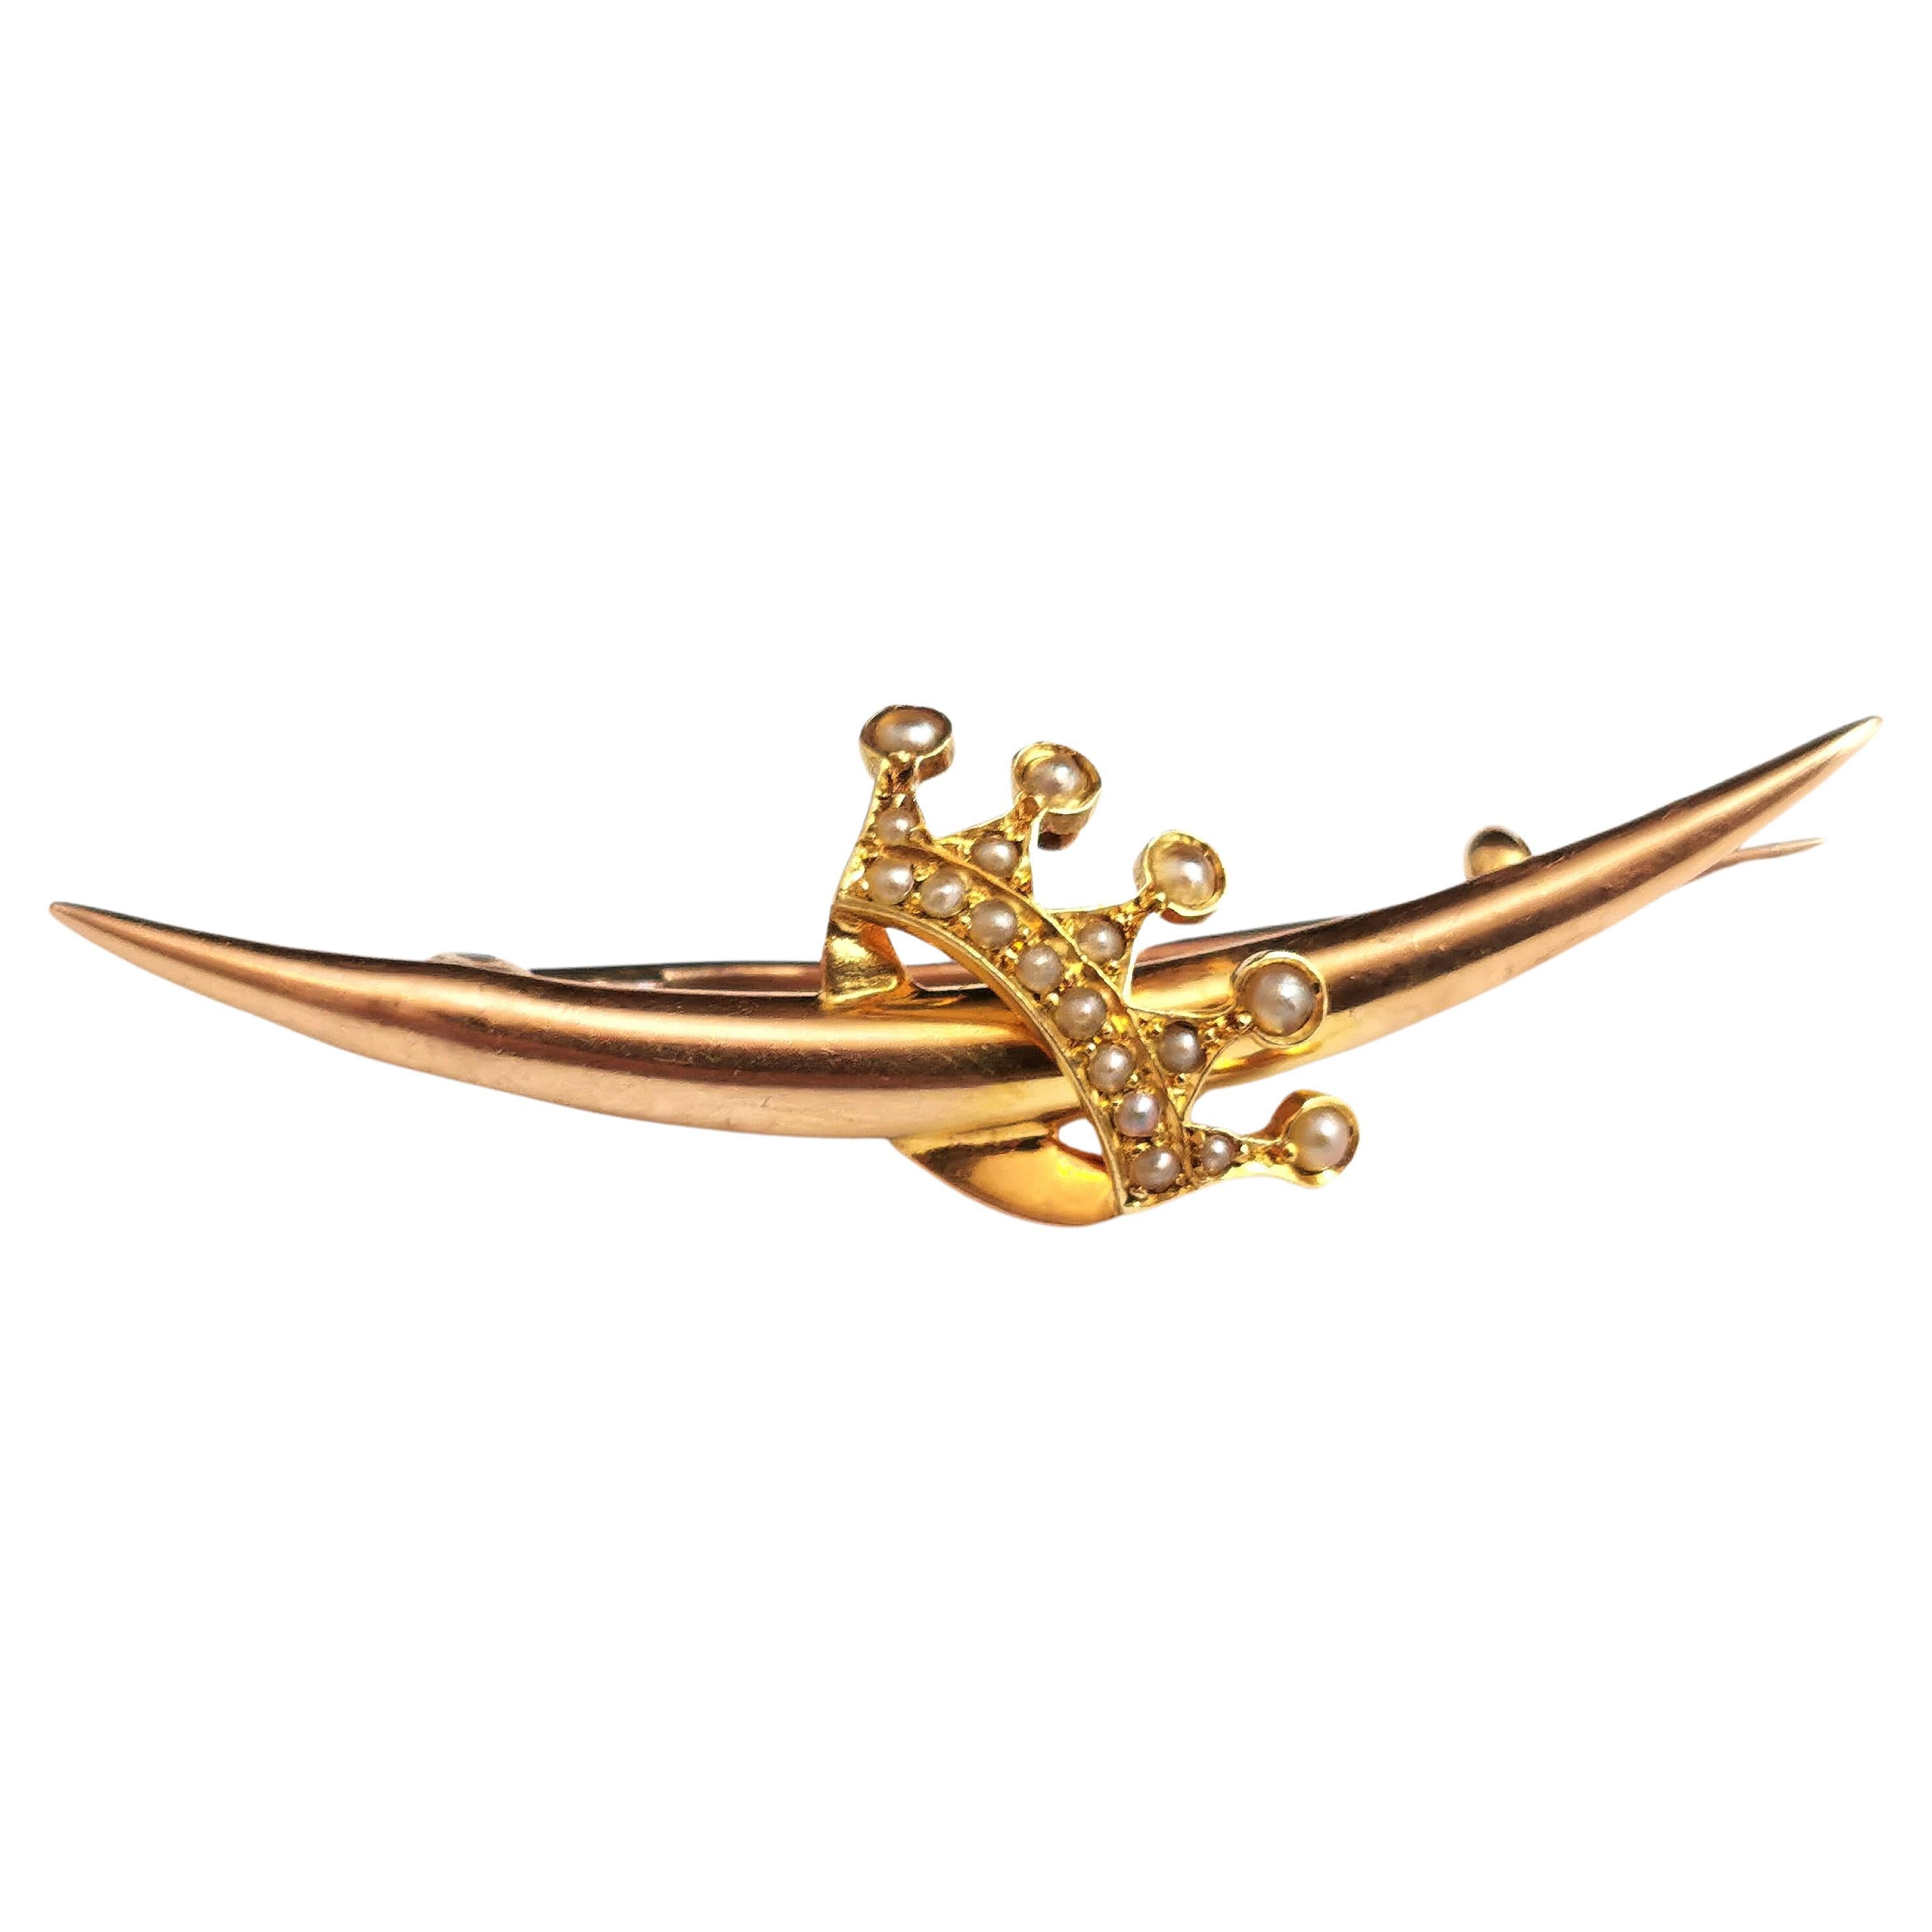 Market Square Jewelers Pearl Crescent Moon Gold Brooch Pin